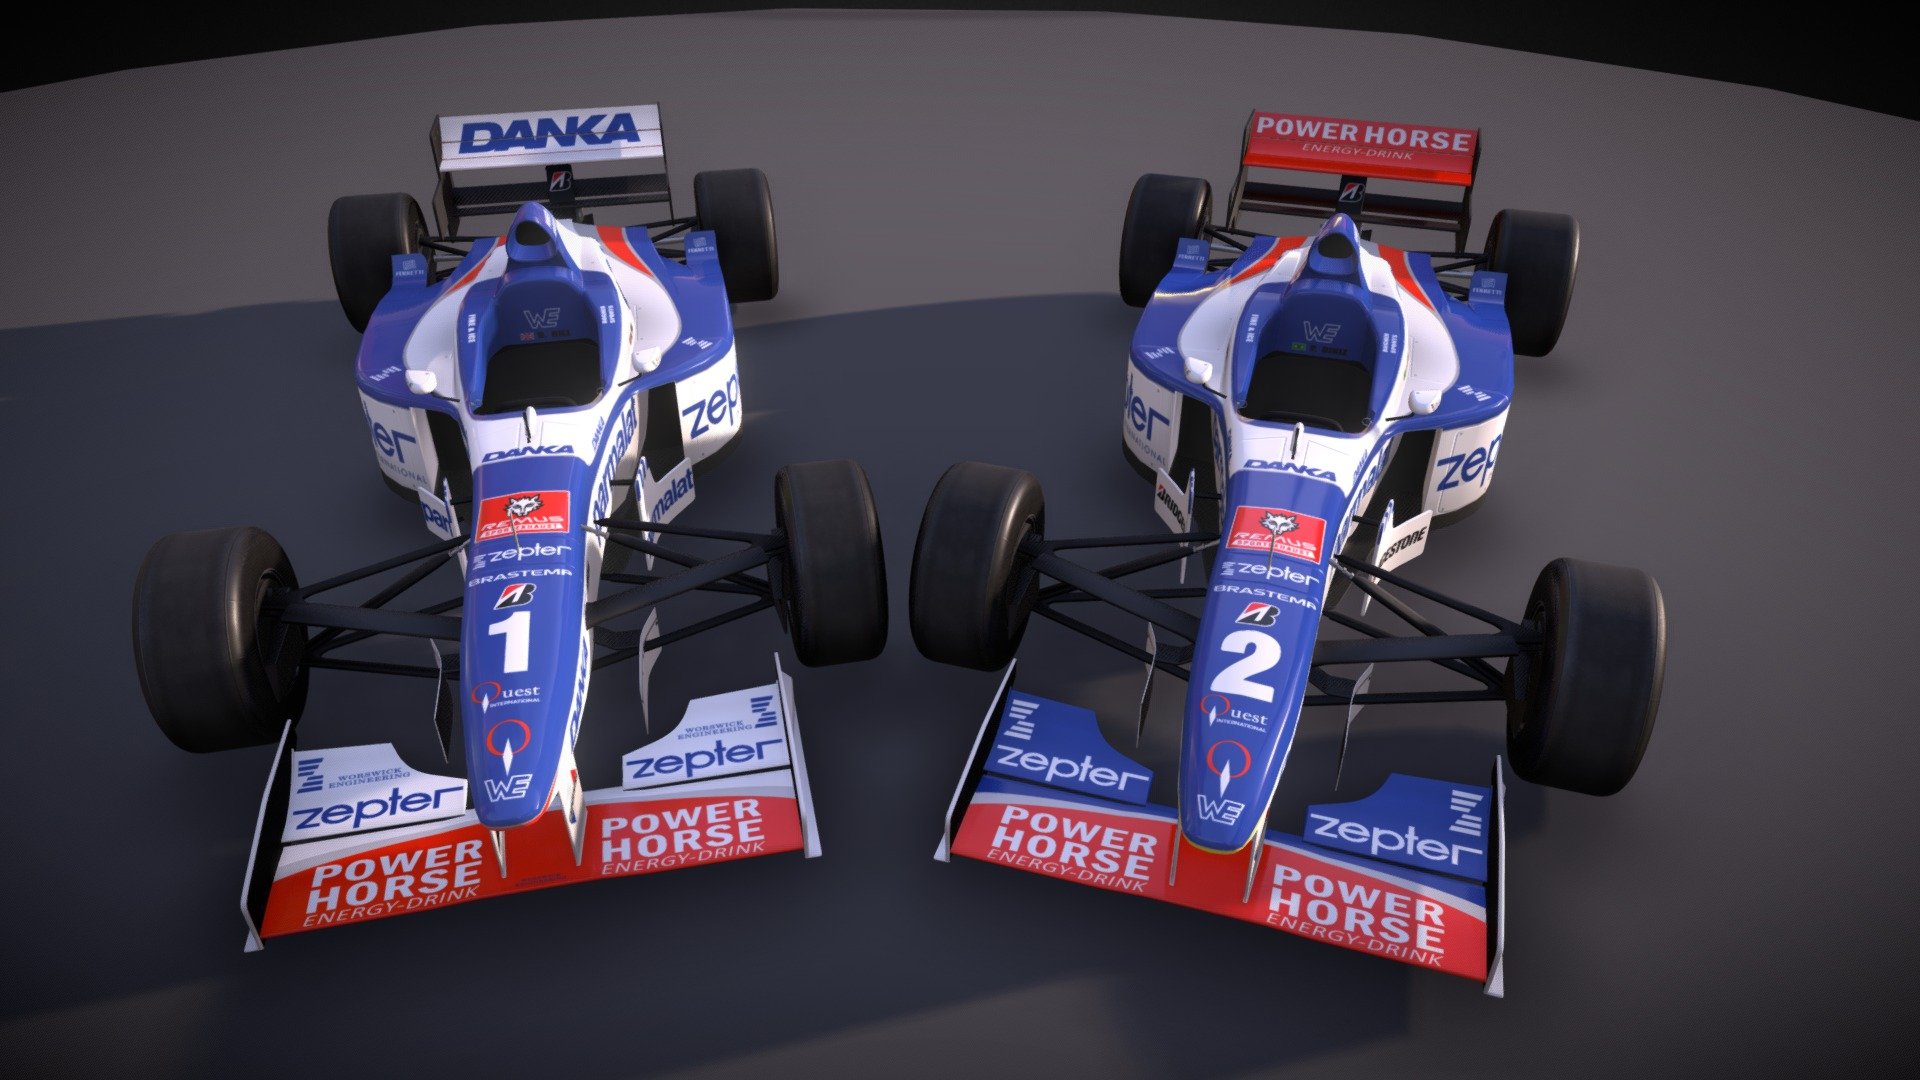 The car is now avaliable for Assetto Corsa and soon for rFactor 2 thanks to ASR Formula !
https://www.asrformula.com/mods/assetto-corsa/beta-early-access/ac-%e2%97%8f-arrows-a18-1997/

Until the 97 Hugarian GP; it was one of those car condemn to the anonymous of the midfield with no time to shine. On that day it started 3rd, jumping to 1st and kept it until the car got a Toyota Disease and started to slow down with 3 lap left, Villeneuve took the lead in the last lap and Hill manage to get the car to finish 2nd, making it the best result in the team history - Arrows A18 Yamaha - 3D model by Kefla 3d model